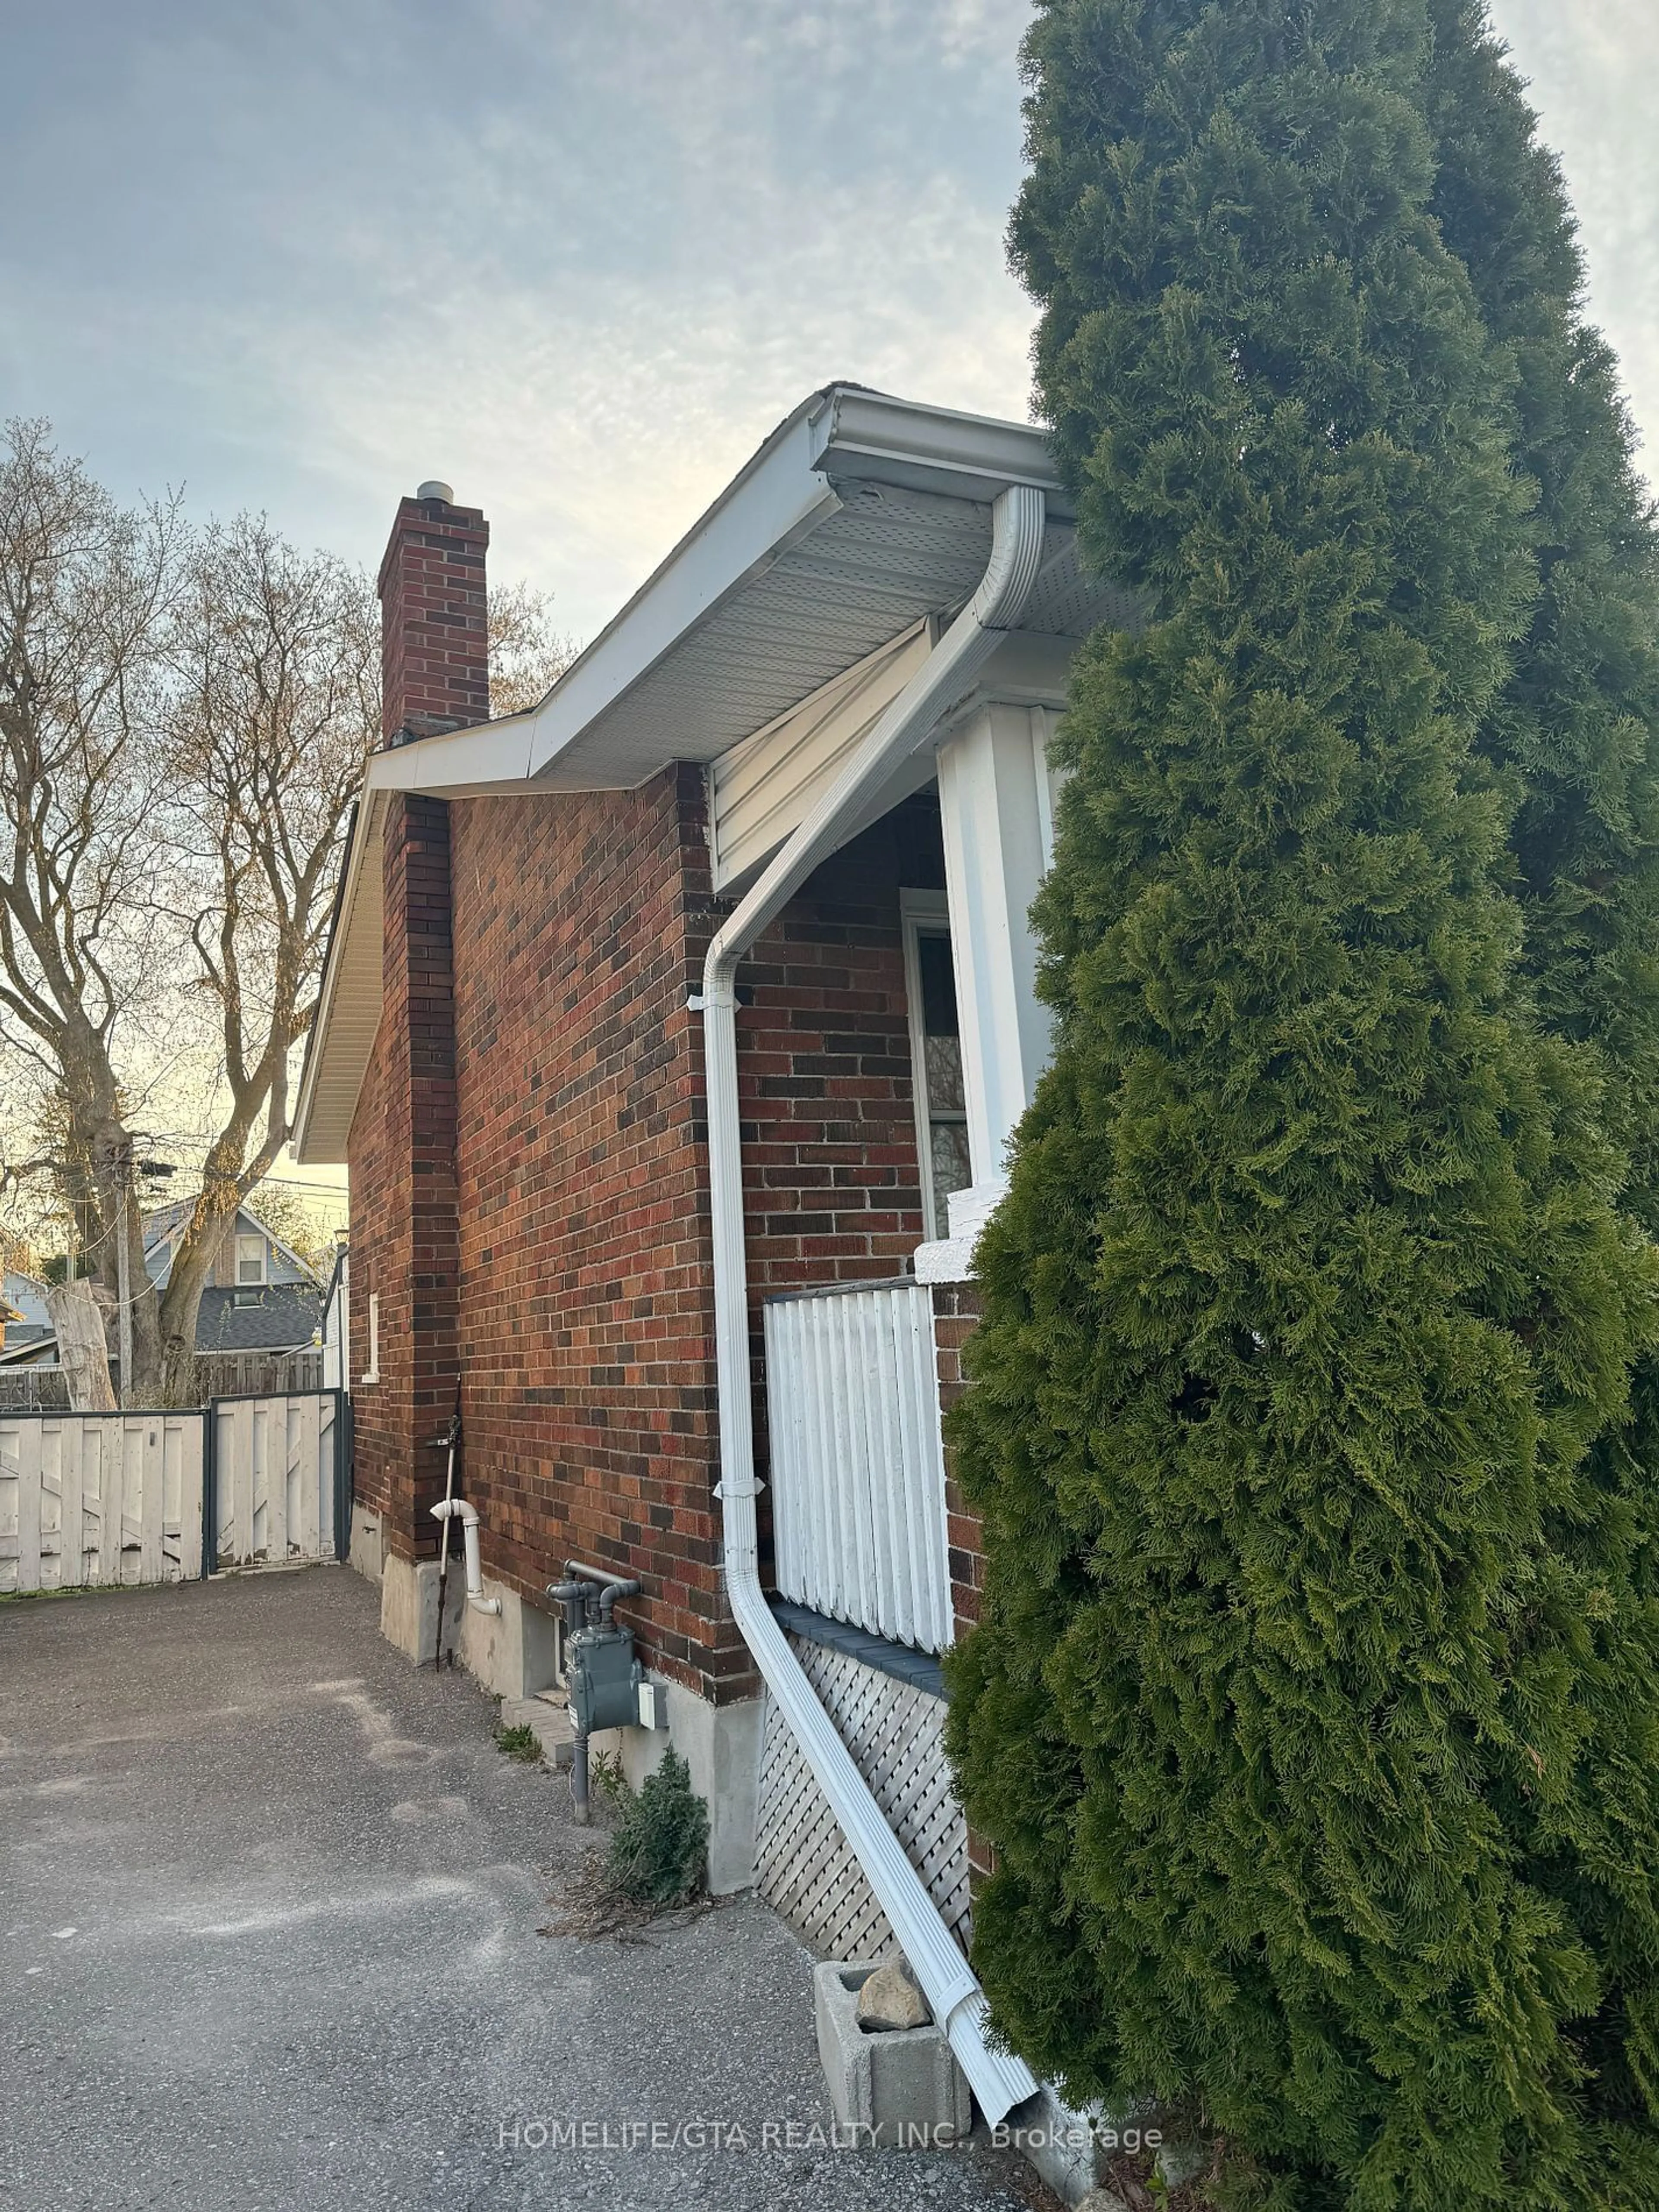 Frontside or backside of a home for 282 Haig St, Oshawa Ontario L1G 5N8